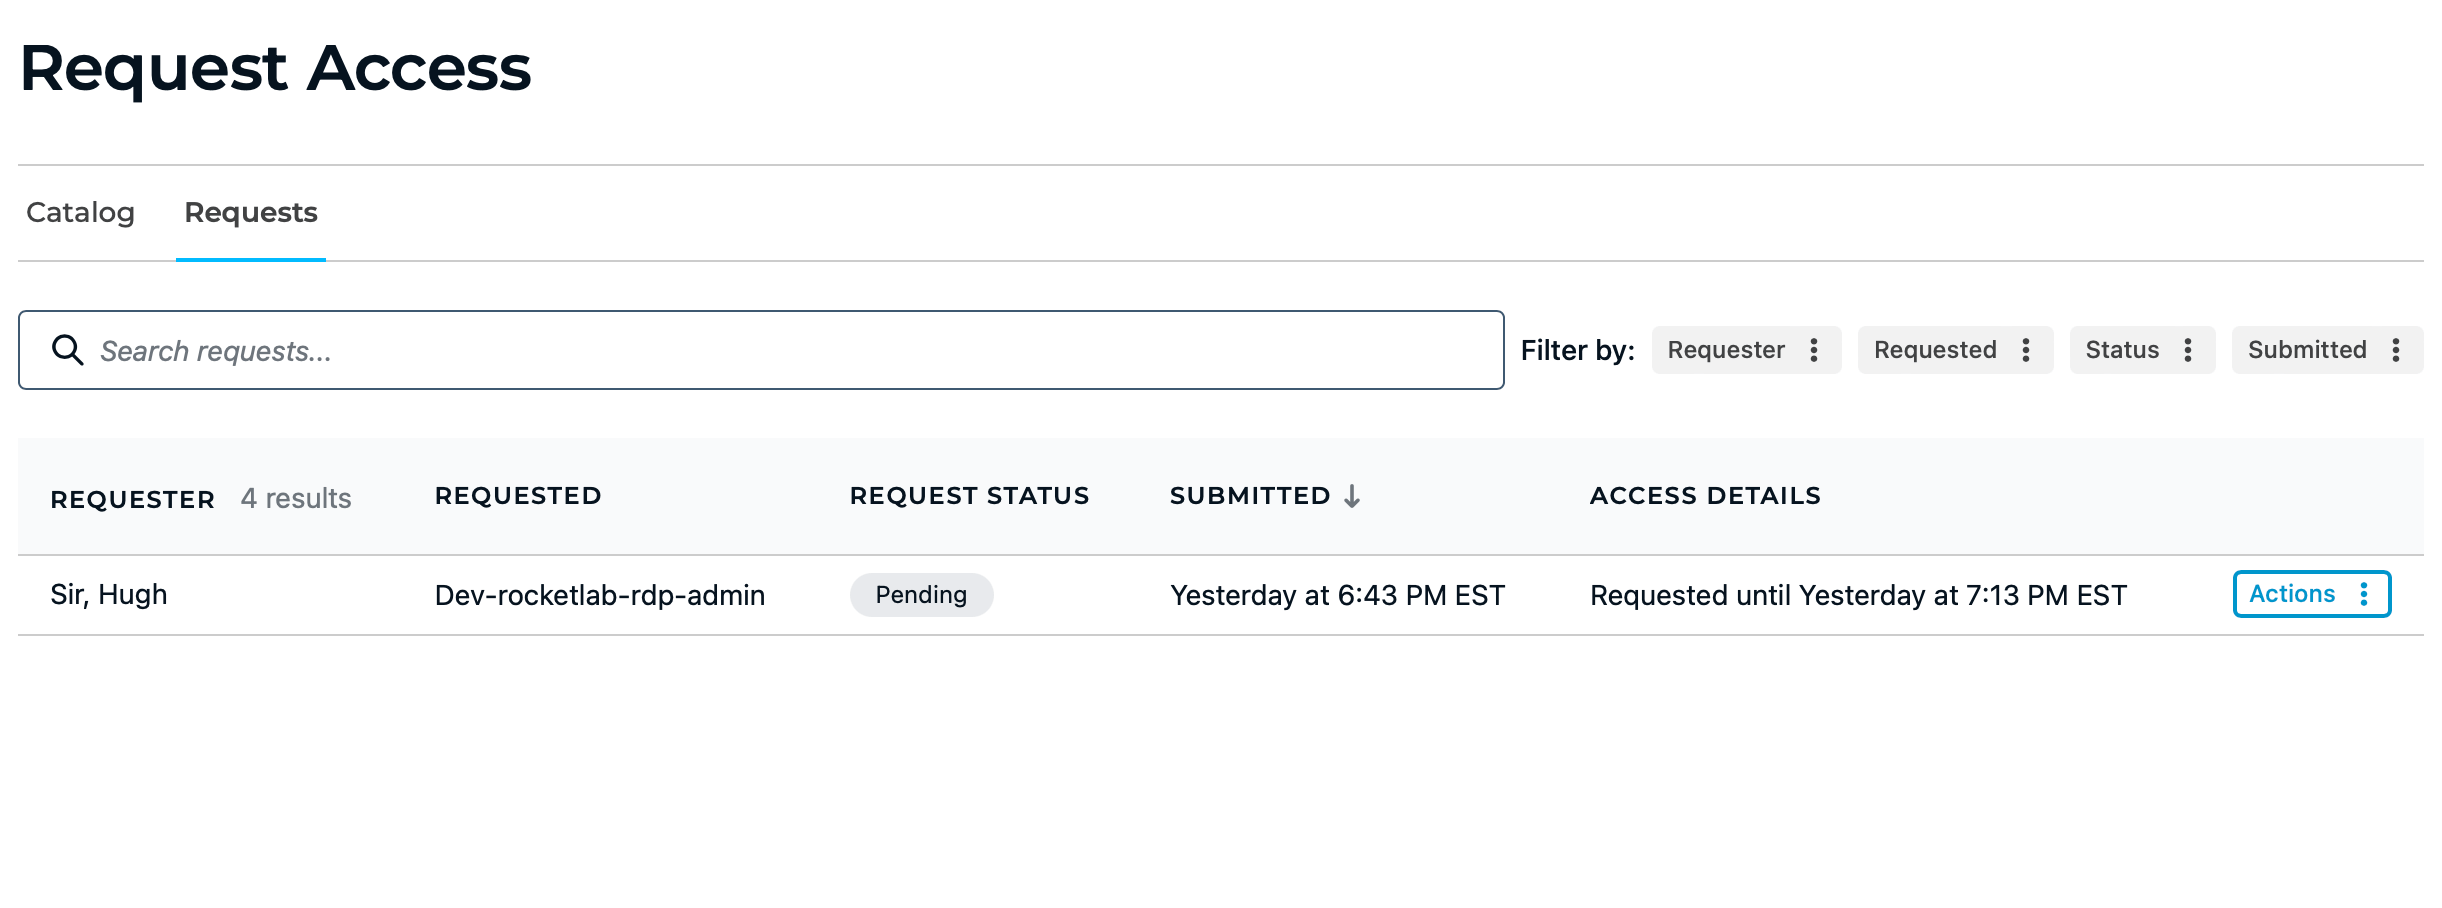 Request Access Modal Form